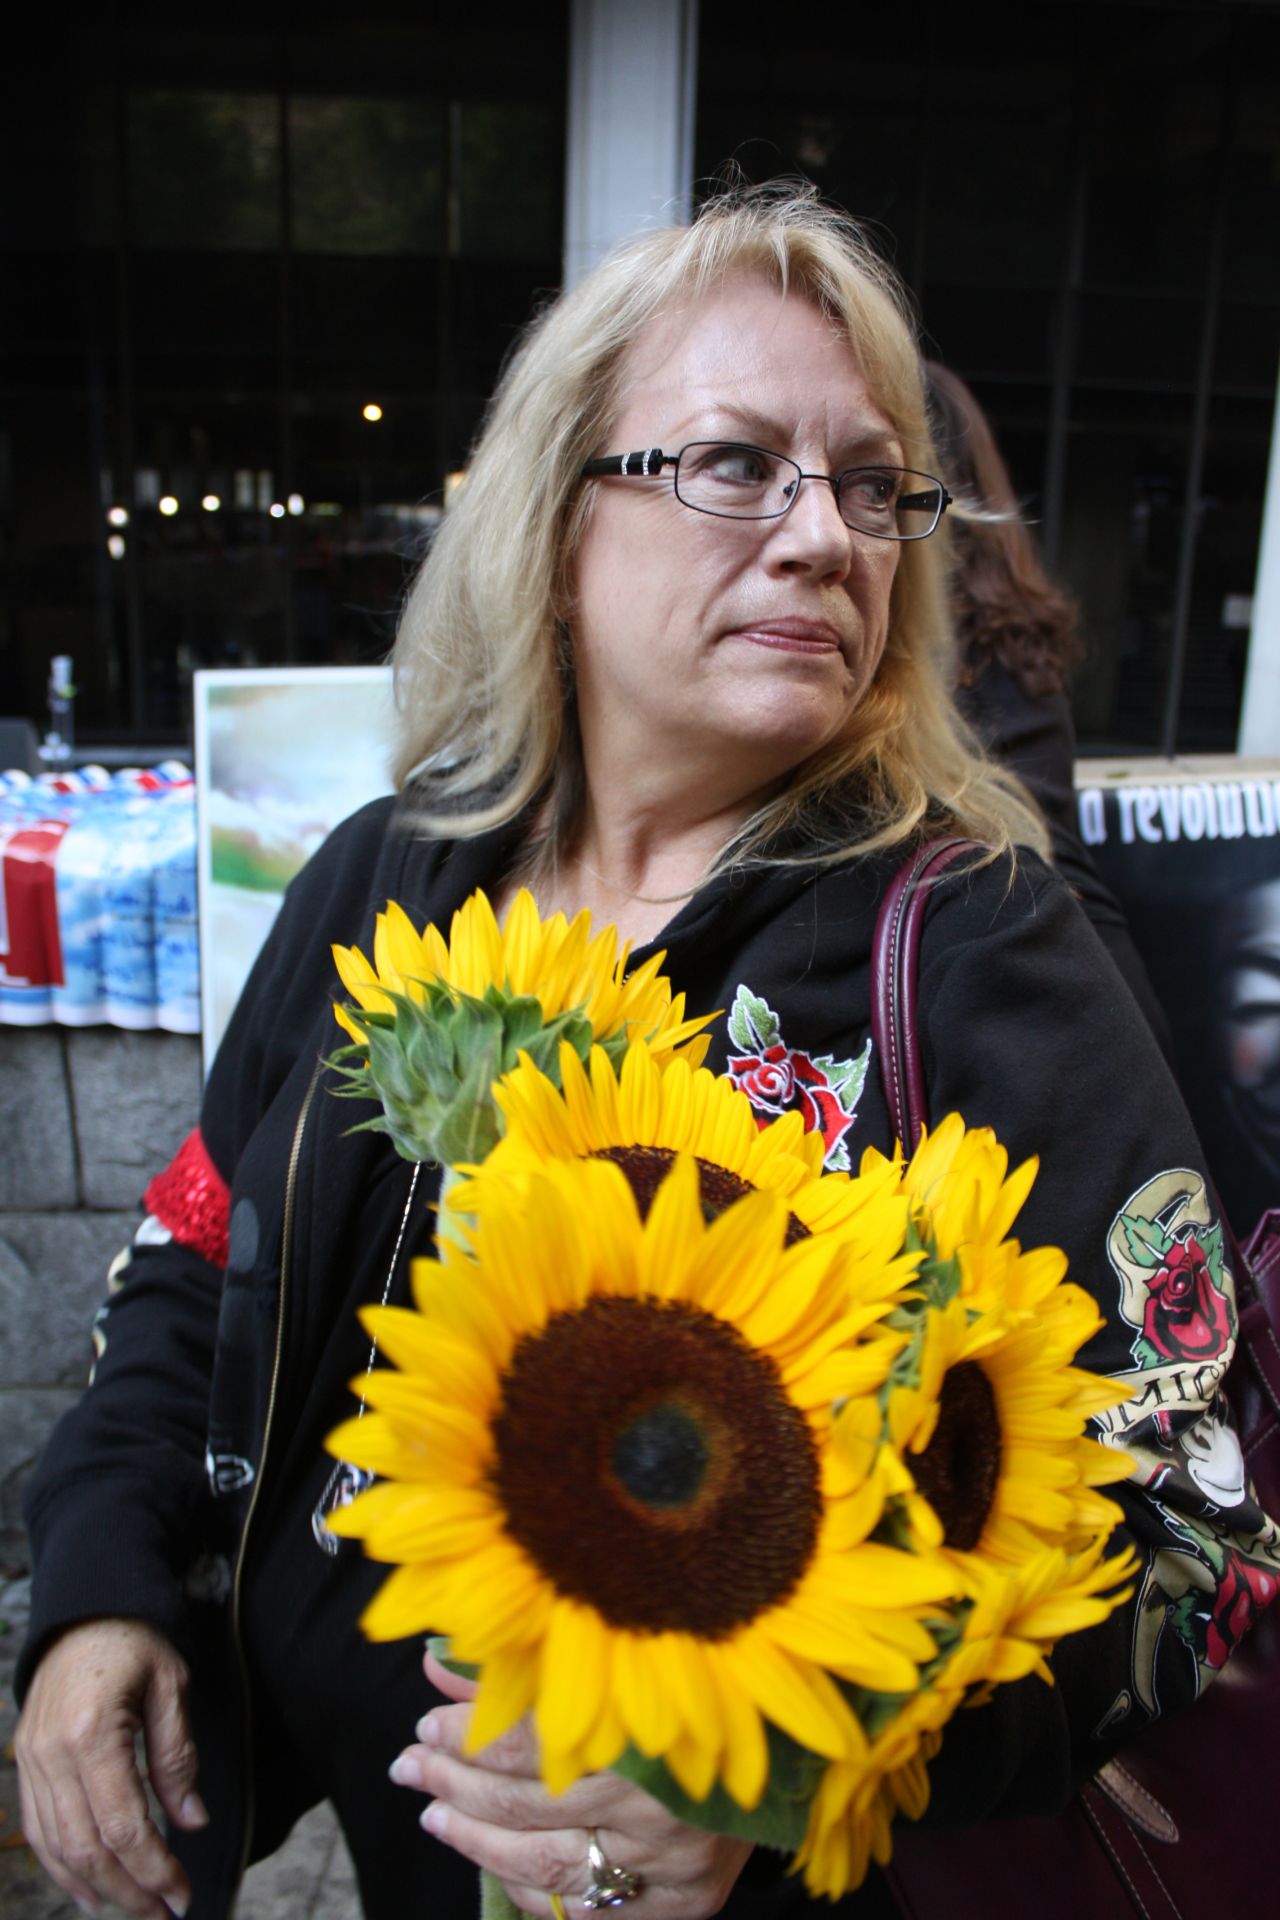 Betty Byrnes passed out sunflowers for a Michael Jackson support group called "Call for Love." "It's the first day of justice and that's really exciting, but there's not going to be any real justice. It won't bring him back," she says.